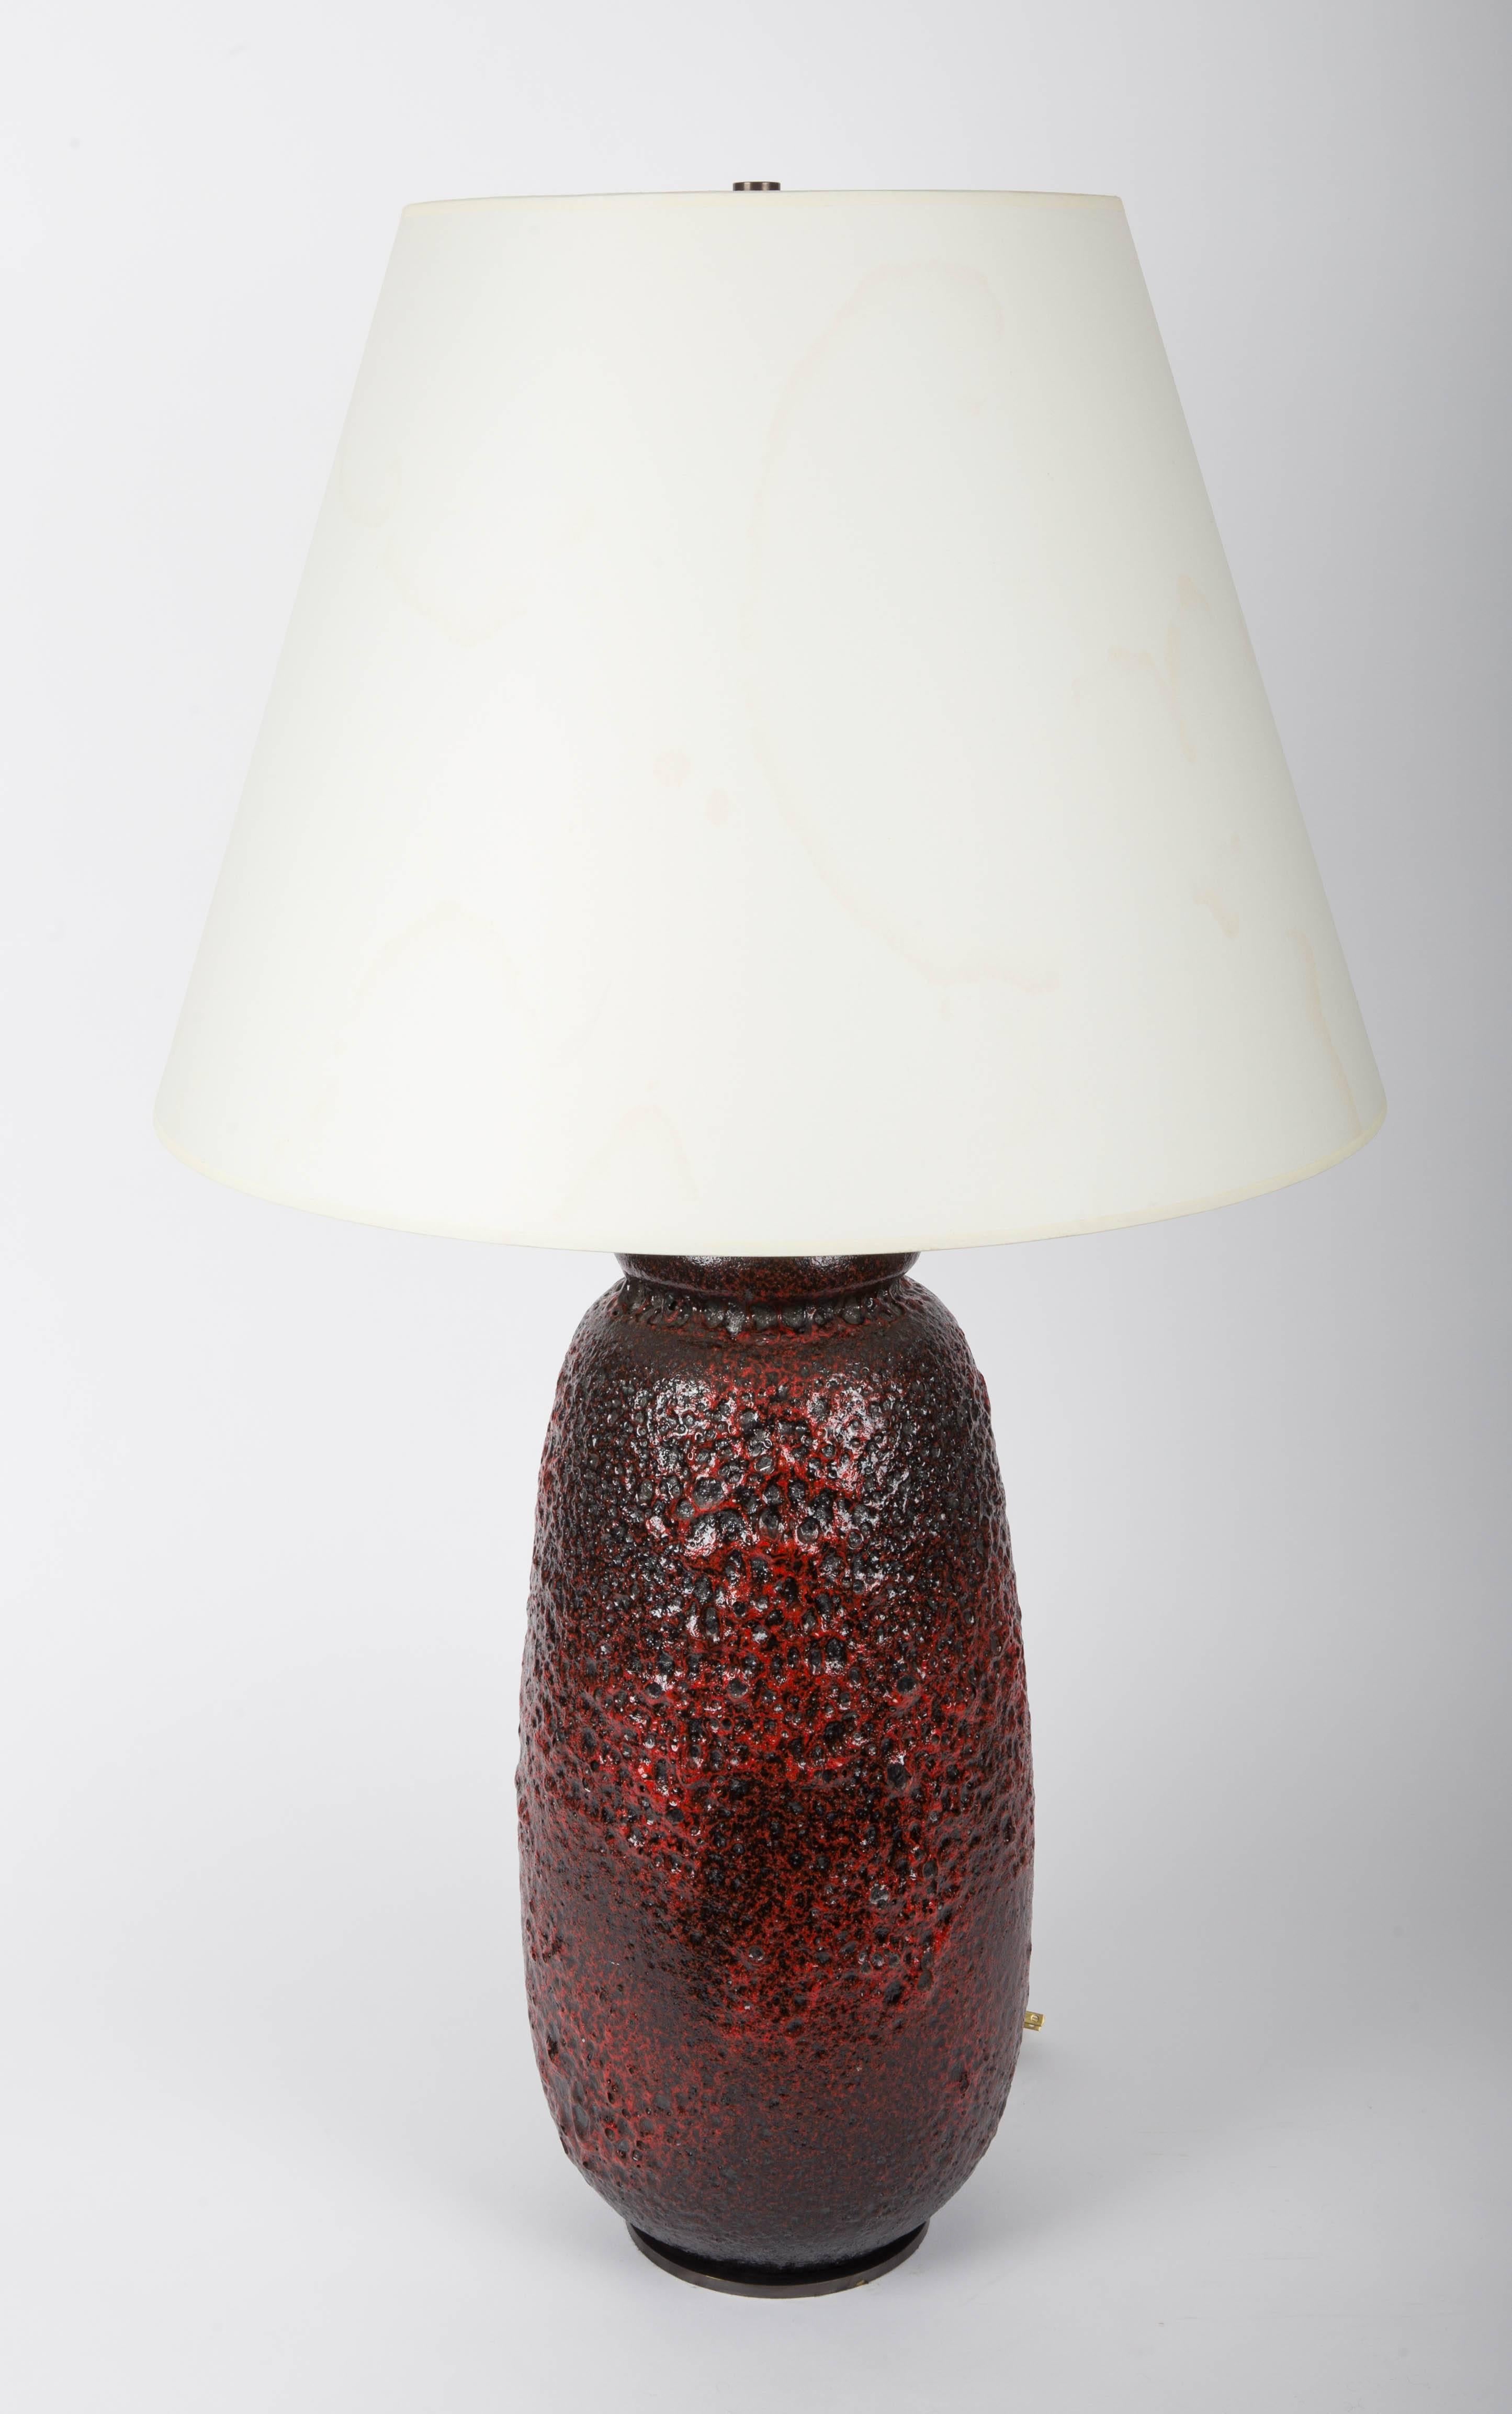 German Red Volcanic Glazed Vase Converted into Lamp